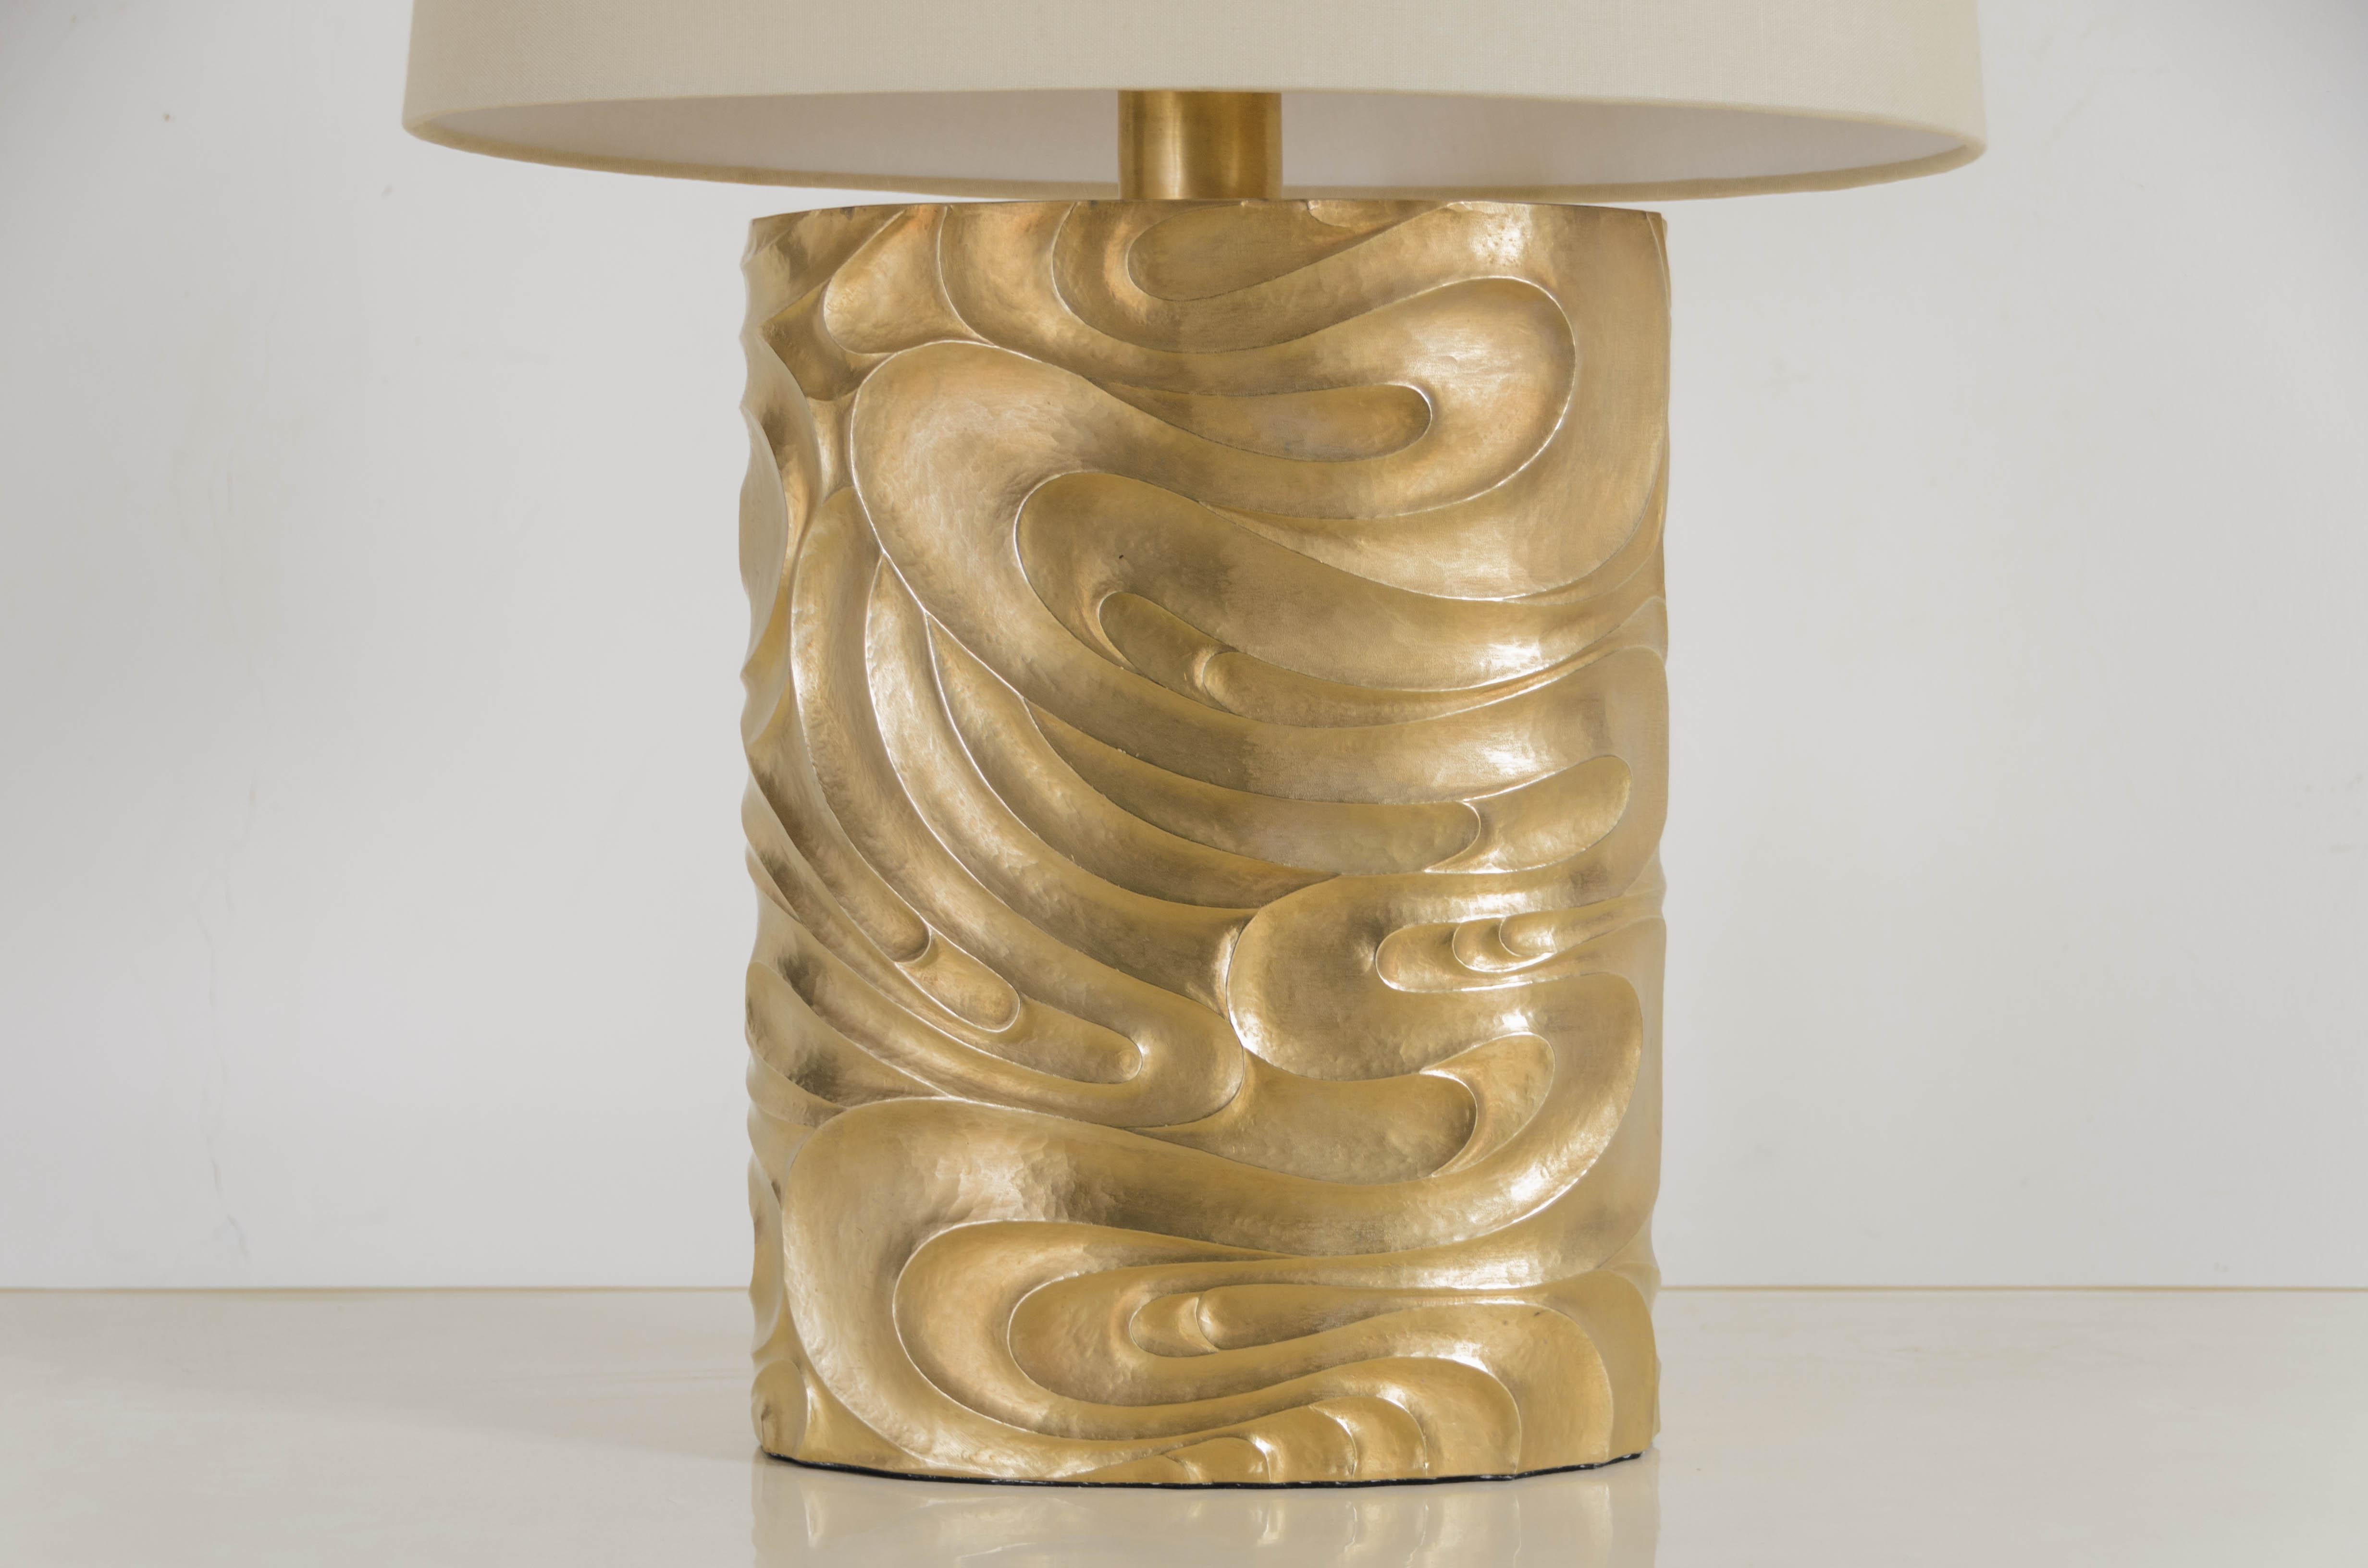 Oval Fei Tian Wen lamp
24K gold plated
Hand Repoussé
Copper base
Natural linen shade
Limited Edition
Each piece is individually crafted and is unique. 

Repoussé is the traditional art of hand-hammering decorative relief onto sheet metal.